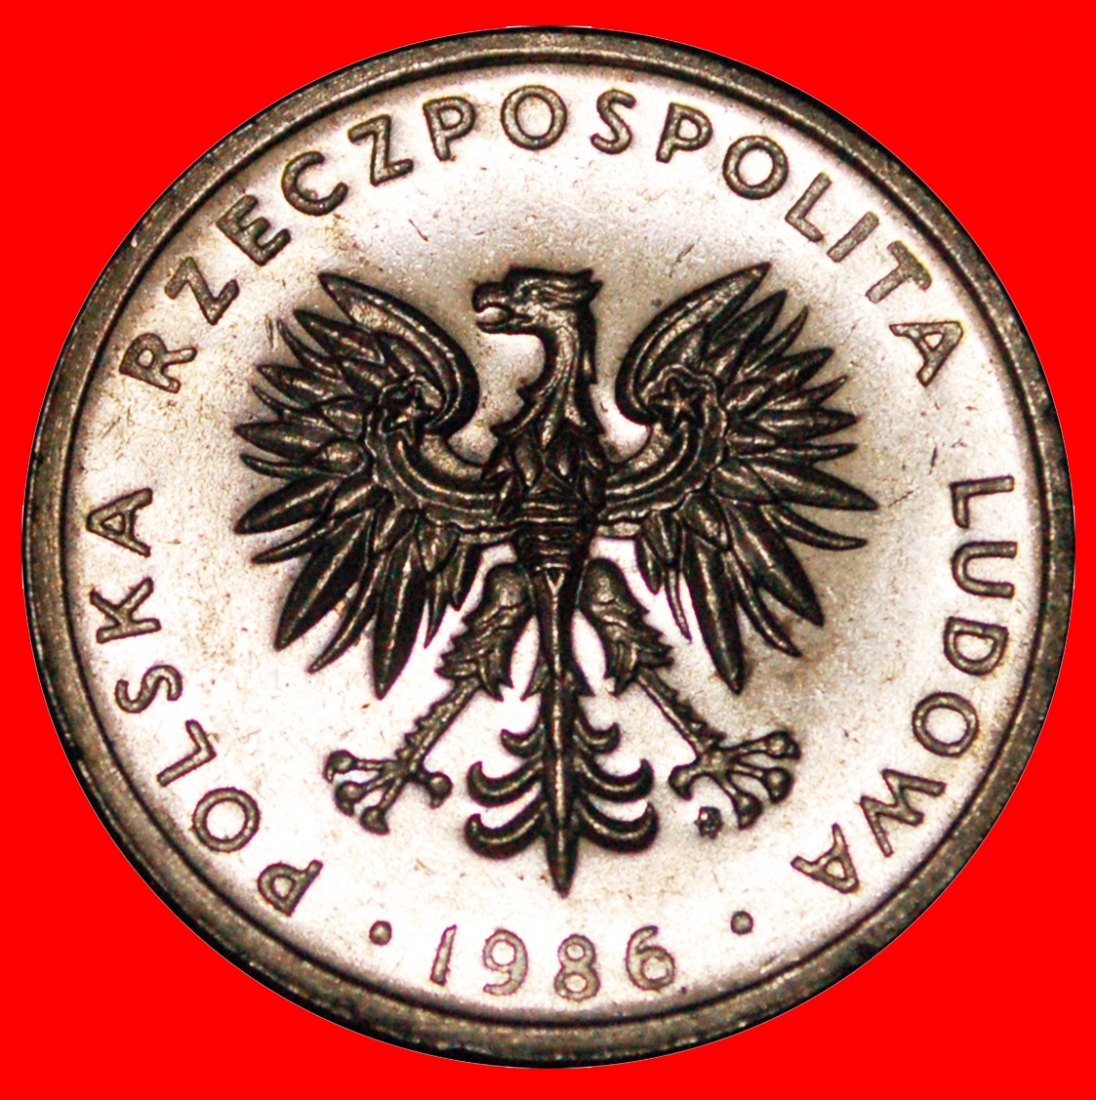  * STARS ON EAGLE: POLAND ★ 20 ZLOTY 1986! DISCOVERY COIN! ★LOW START ★ NO RESERVE!   